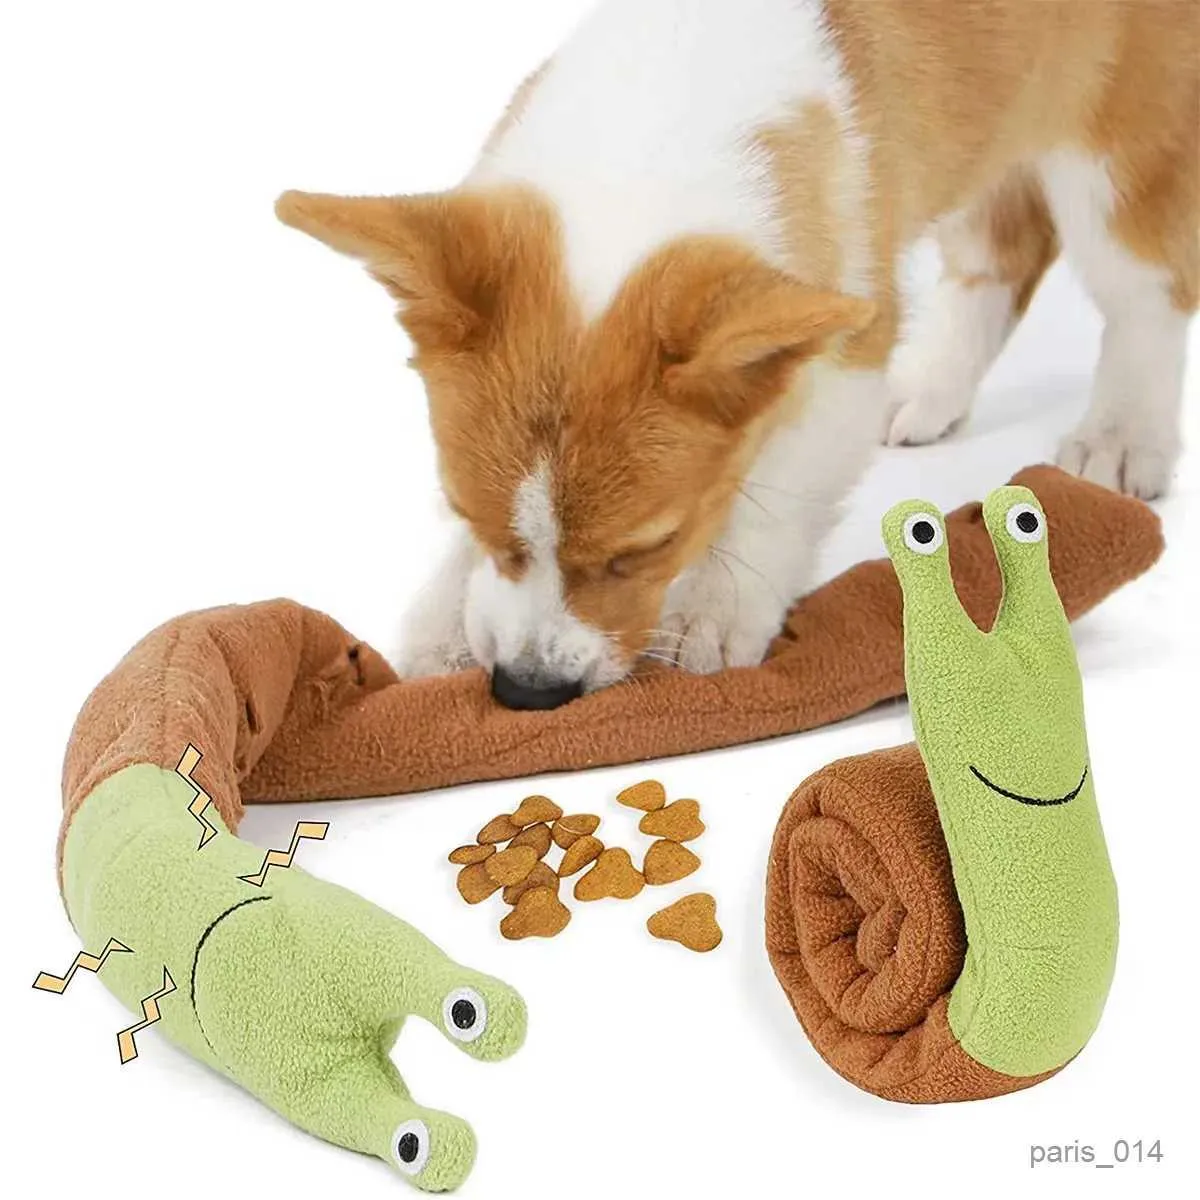 Stuffed Plush Animals 60cm Pet Dog Toy Cartoon snail Plush Toys for dog toys Supplies Hide food for Pet Toy Funny Durable Chew Molar Toy PetsSupplies